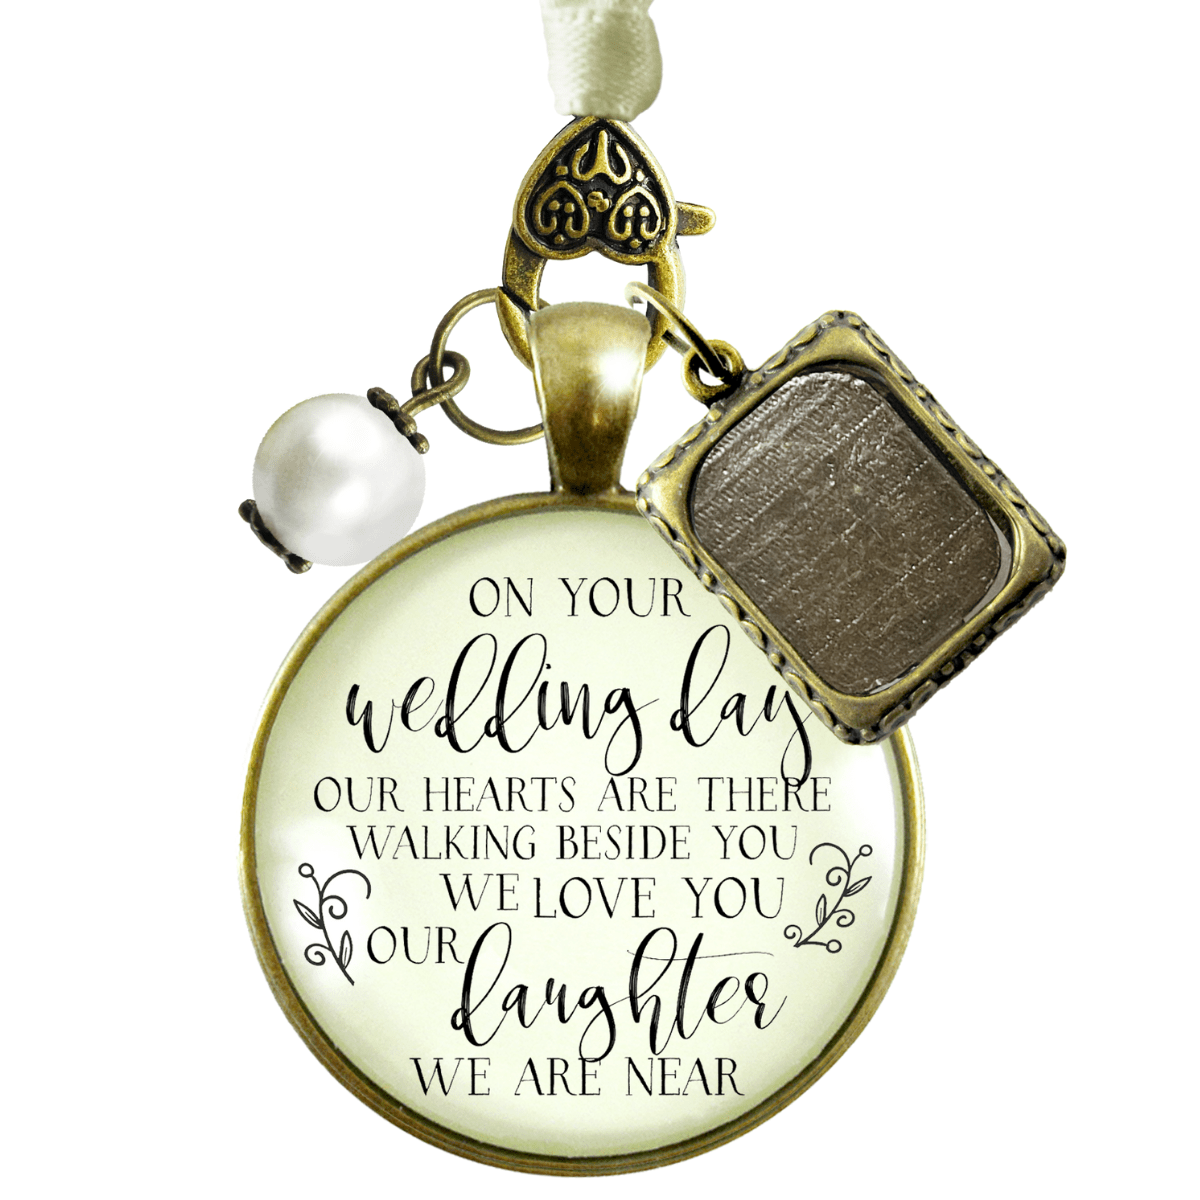 On Your Wedding Day OUR Heart Is There Walking Beside You DAUGHTER - BRONZE - CREAM - WHITE BEAD